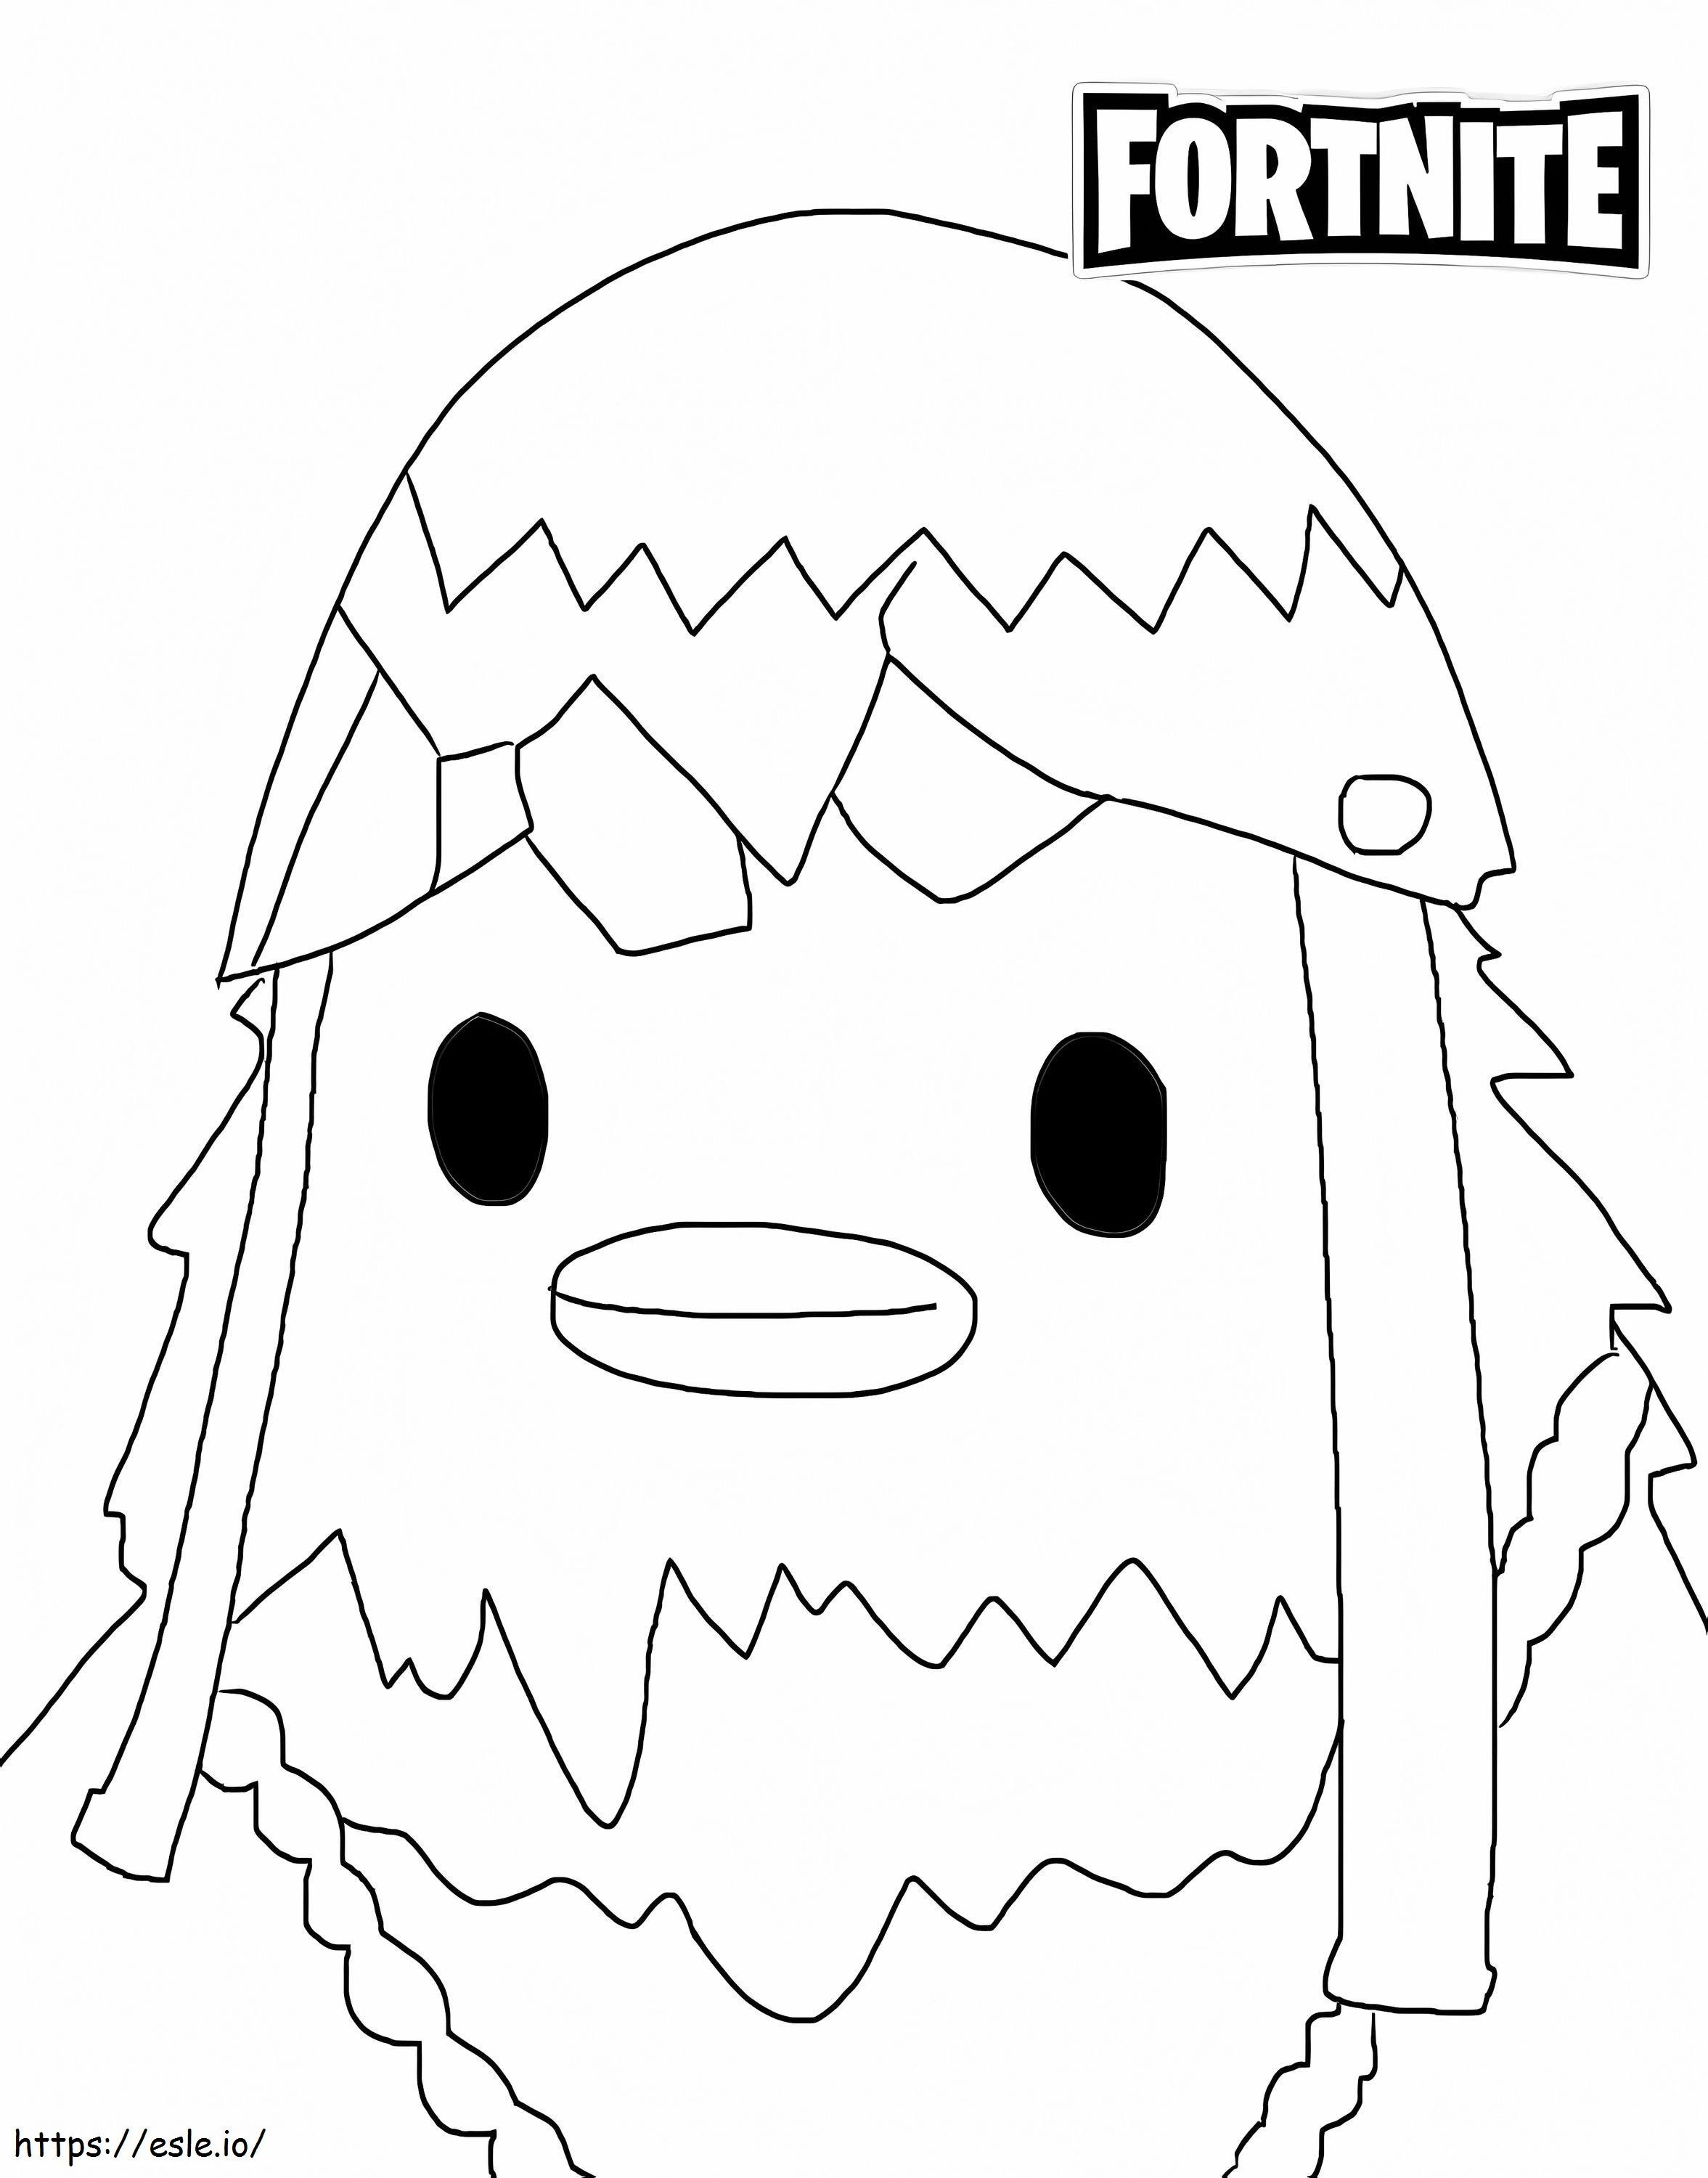 Cluck Fortnite 803X1024 coloring page